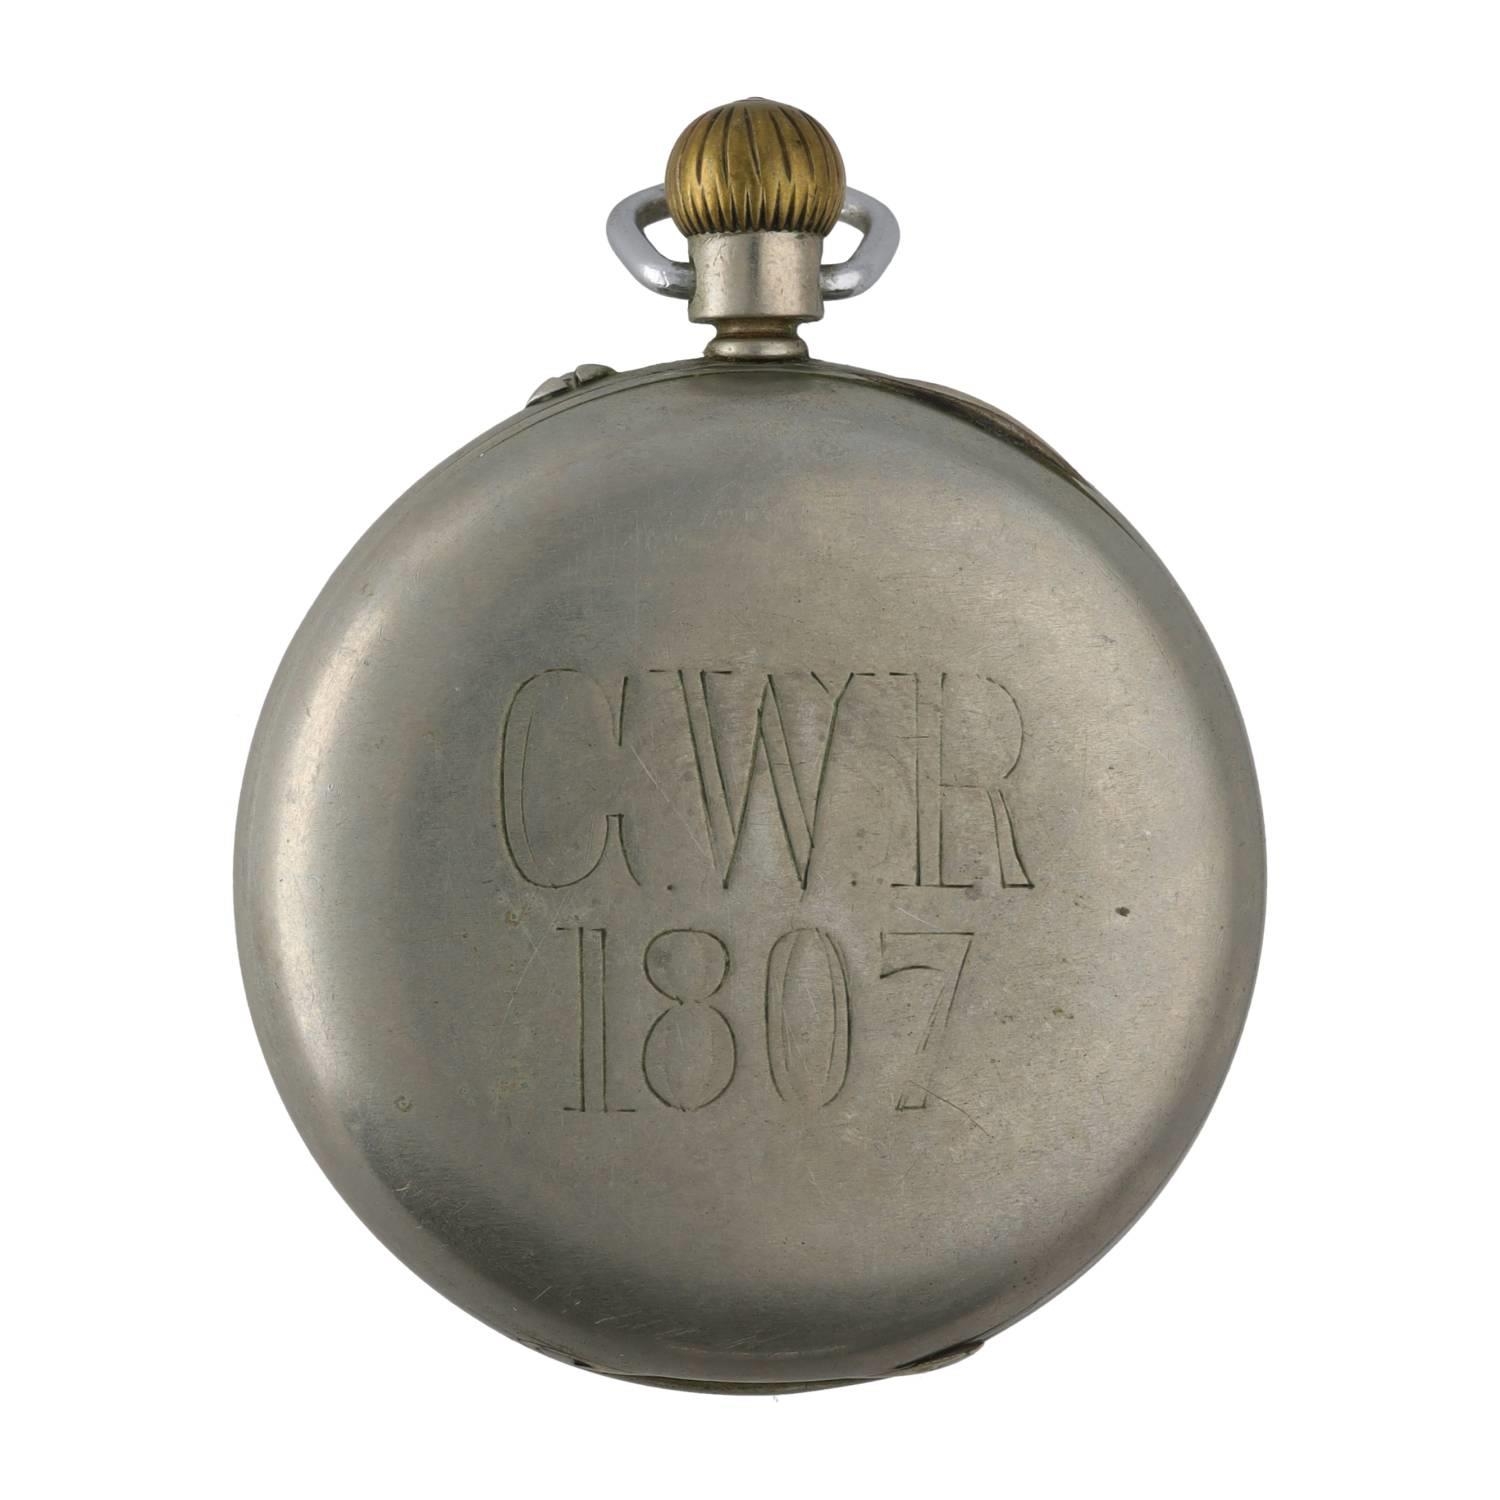 Great Western Railway (G.W.R) - Rotherhams nickel cased lever pocket watch, the movement signed - Image 4 of 4